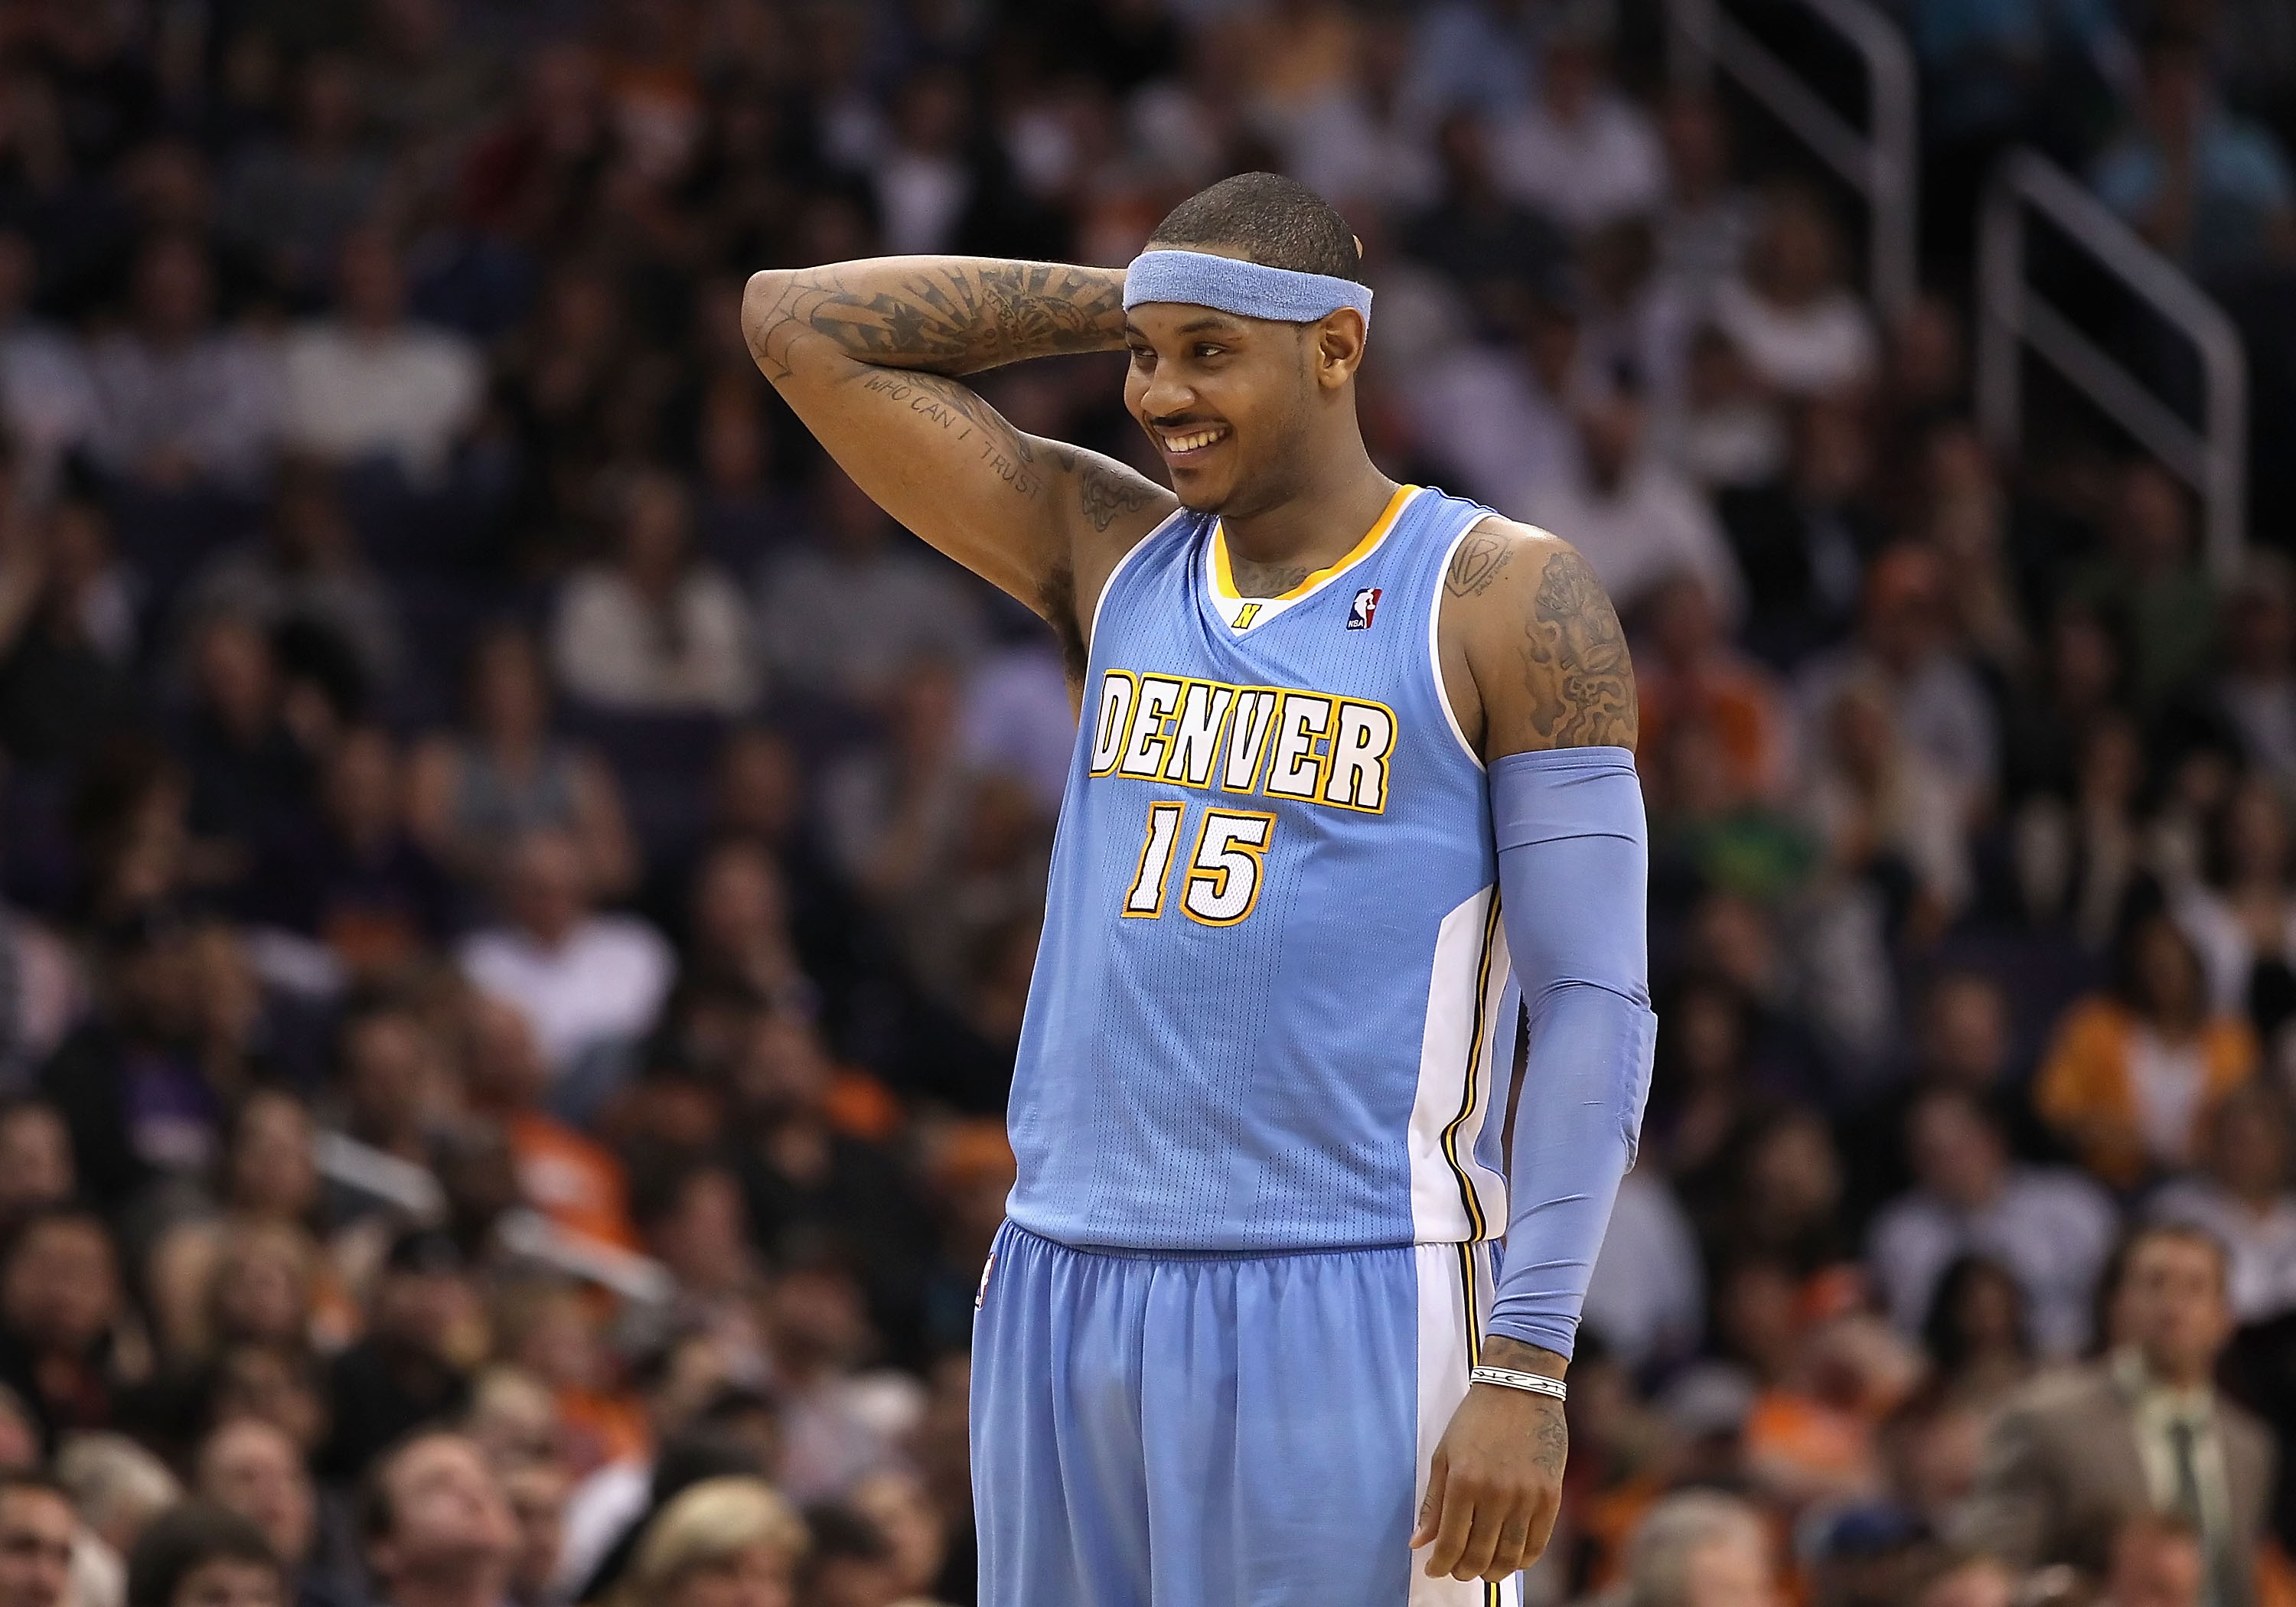 PHOENIX - NOVEMBER 15:  Carmelo Anthony #15 of the Denver Nuggets during the NBA game against the Phoenix Suns at US Airways Center on November 15, 2010 in Phoenix, Arizona.  The Suns defeated the Nuggets 100-94.  NOTE TO USER: User expressly acknowledges